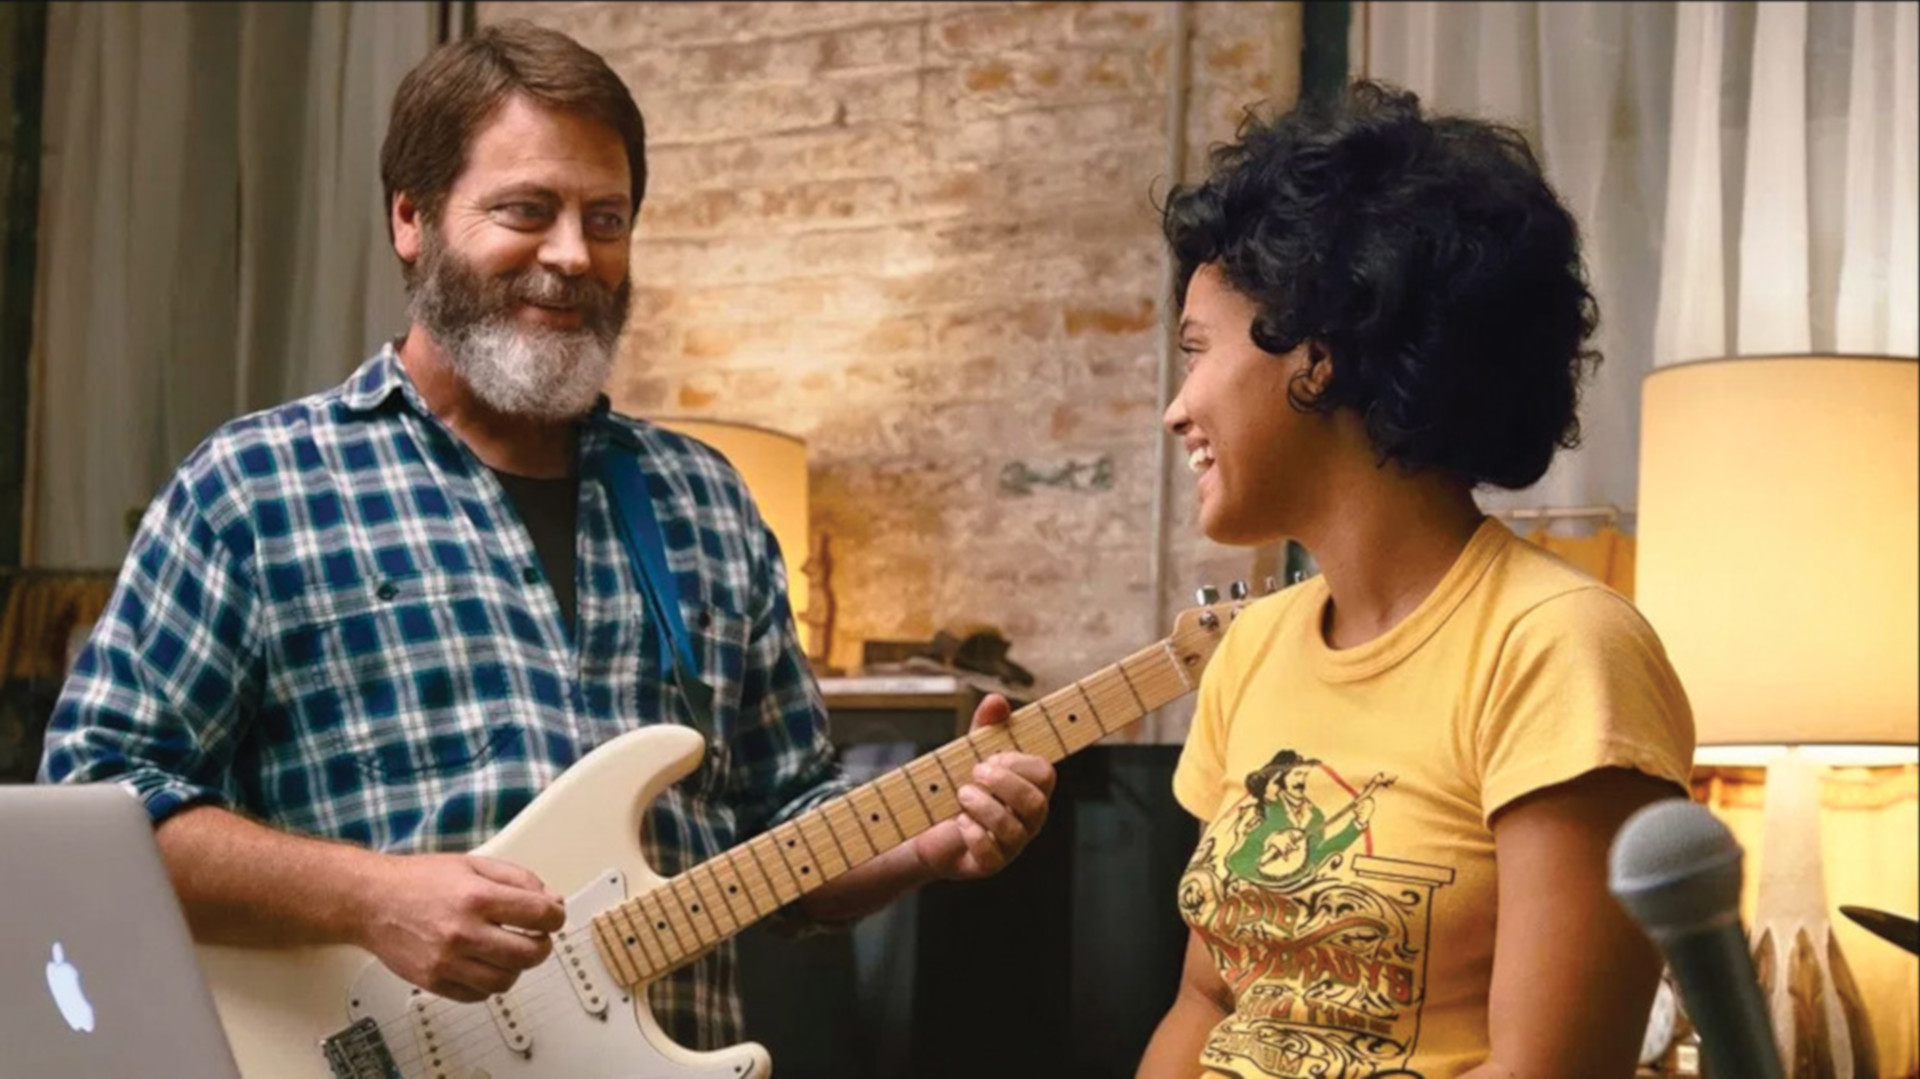 Hearts Beat Loud: Feel-good father-daughter film includes sweet gay romance